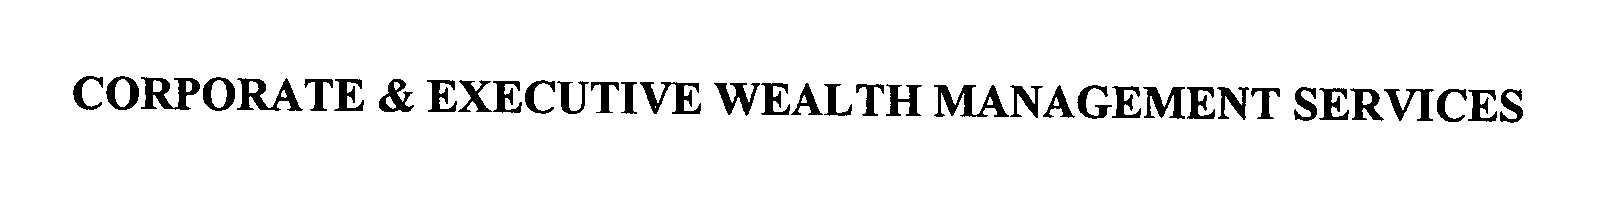  CORPORATE &amp; EXECUTIVE WEALTH MANAGEMENT SERVICES